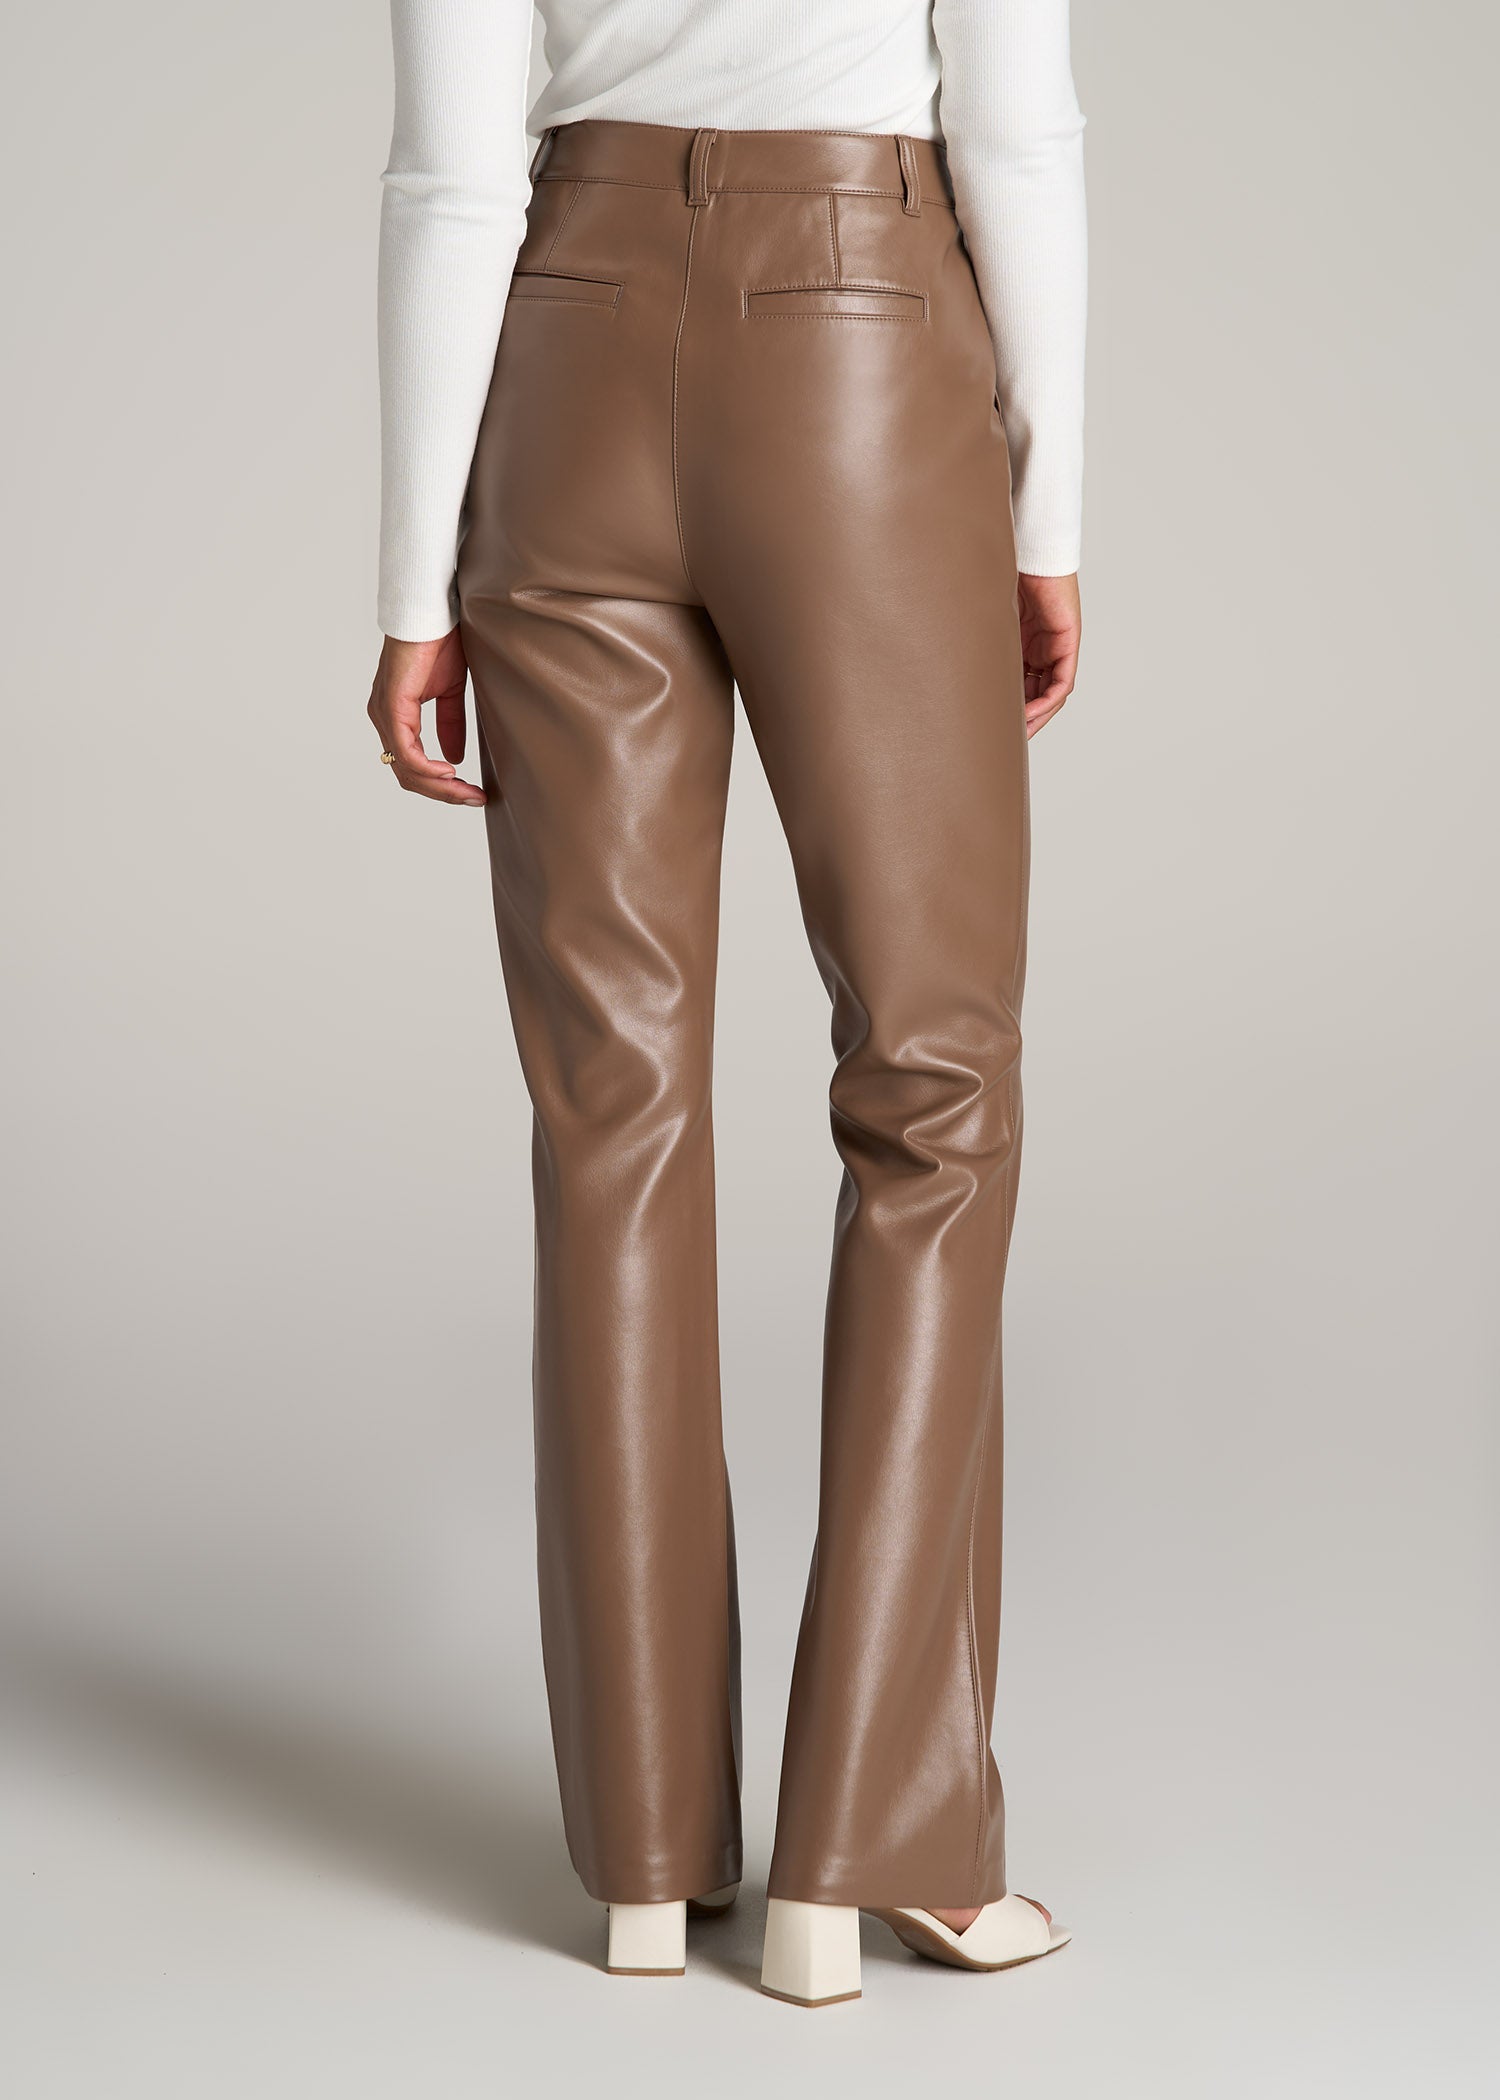 Ladies Leather Pants Brown - Tight Leather Pants Womens